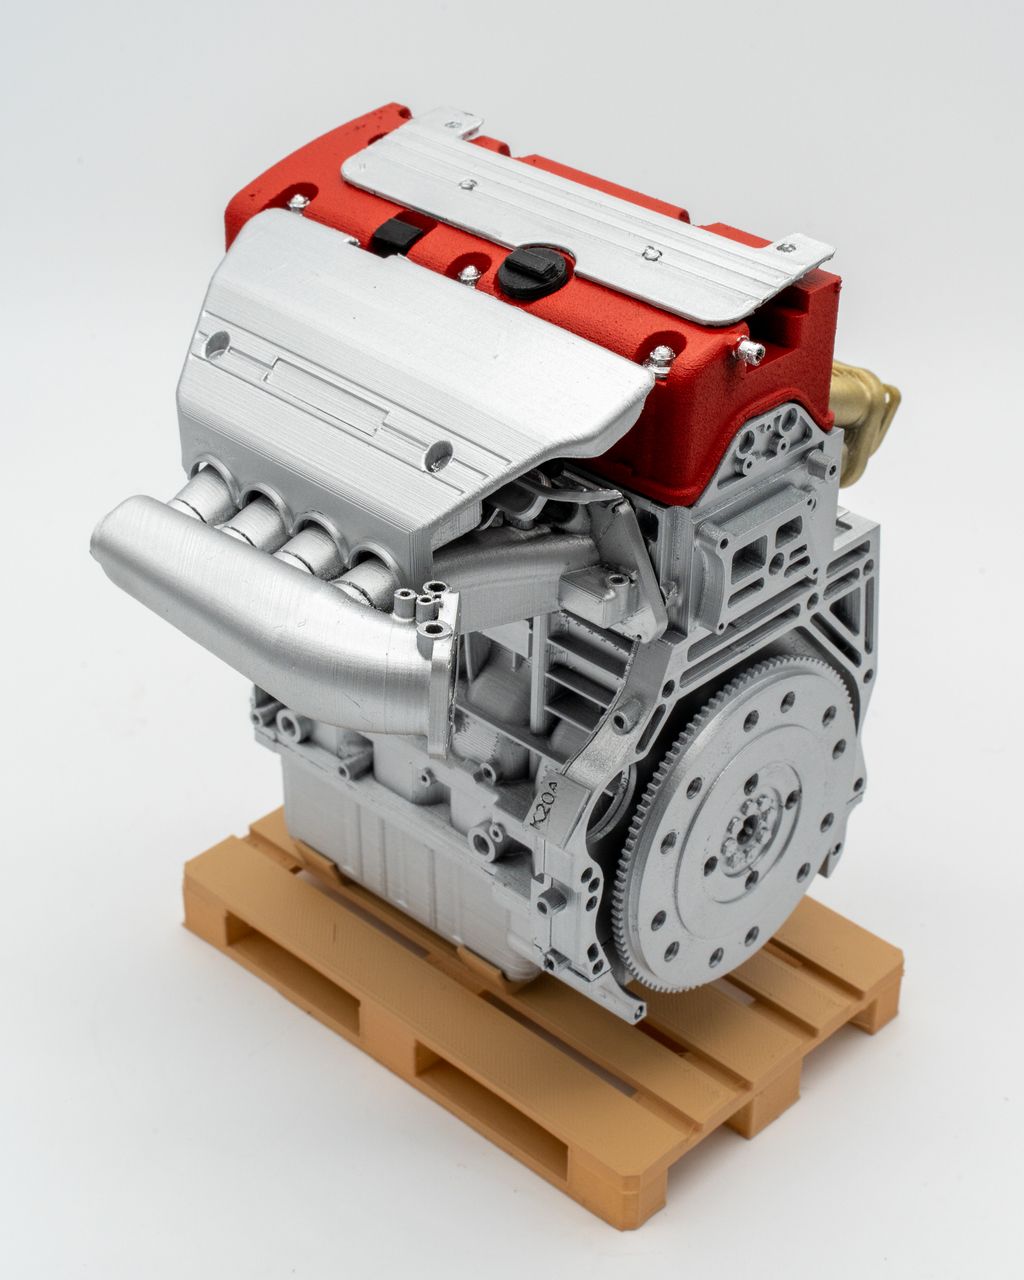 1/4 K-Series (K20/K24) RED Scale Engine - Assembled